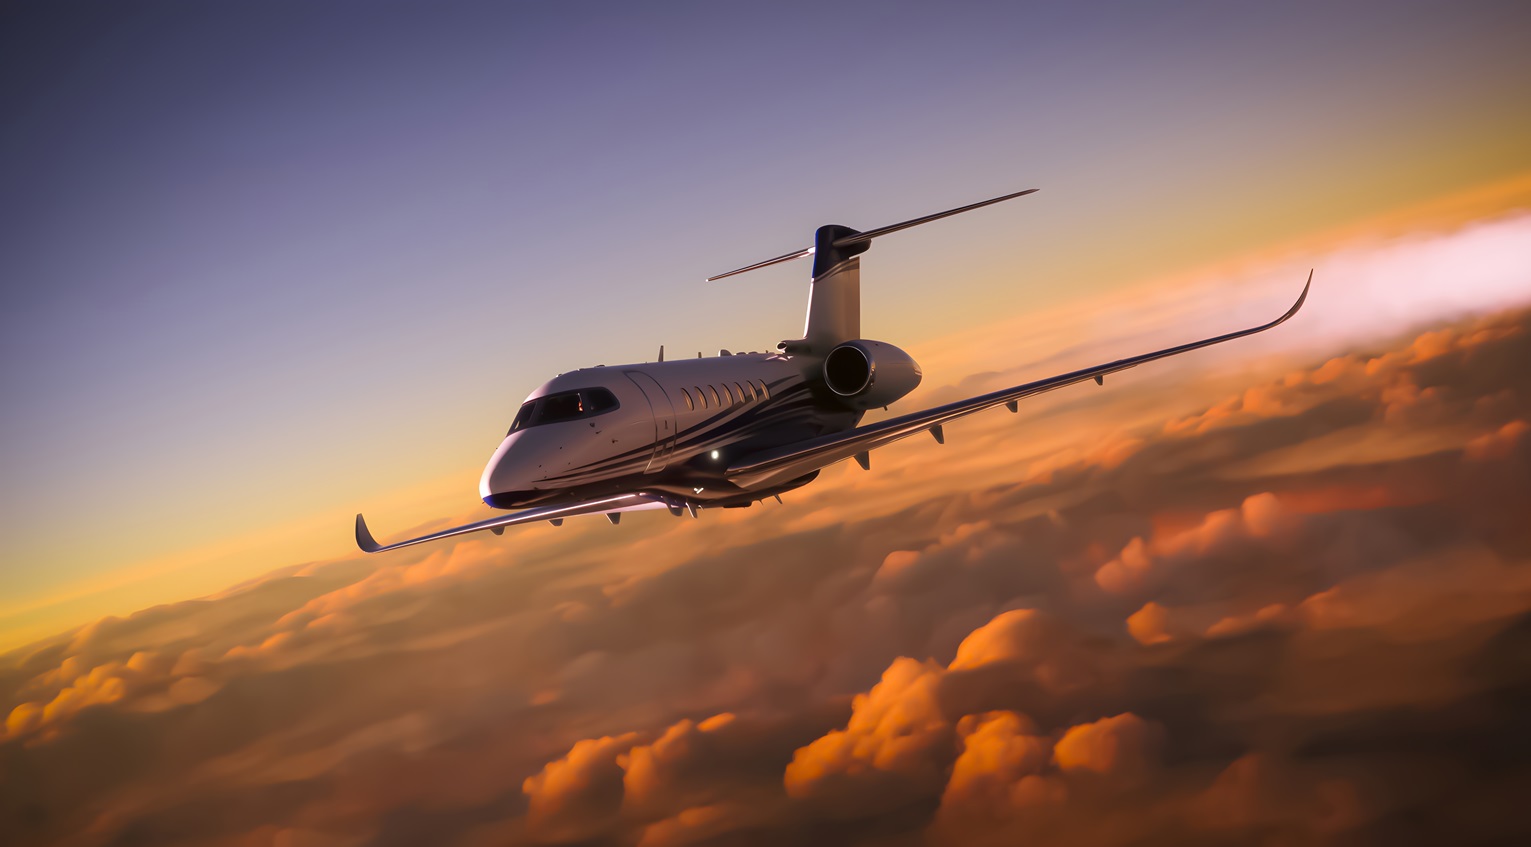 a luxury private jet airplane overflying cloudy skies at sunset